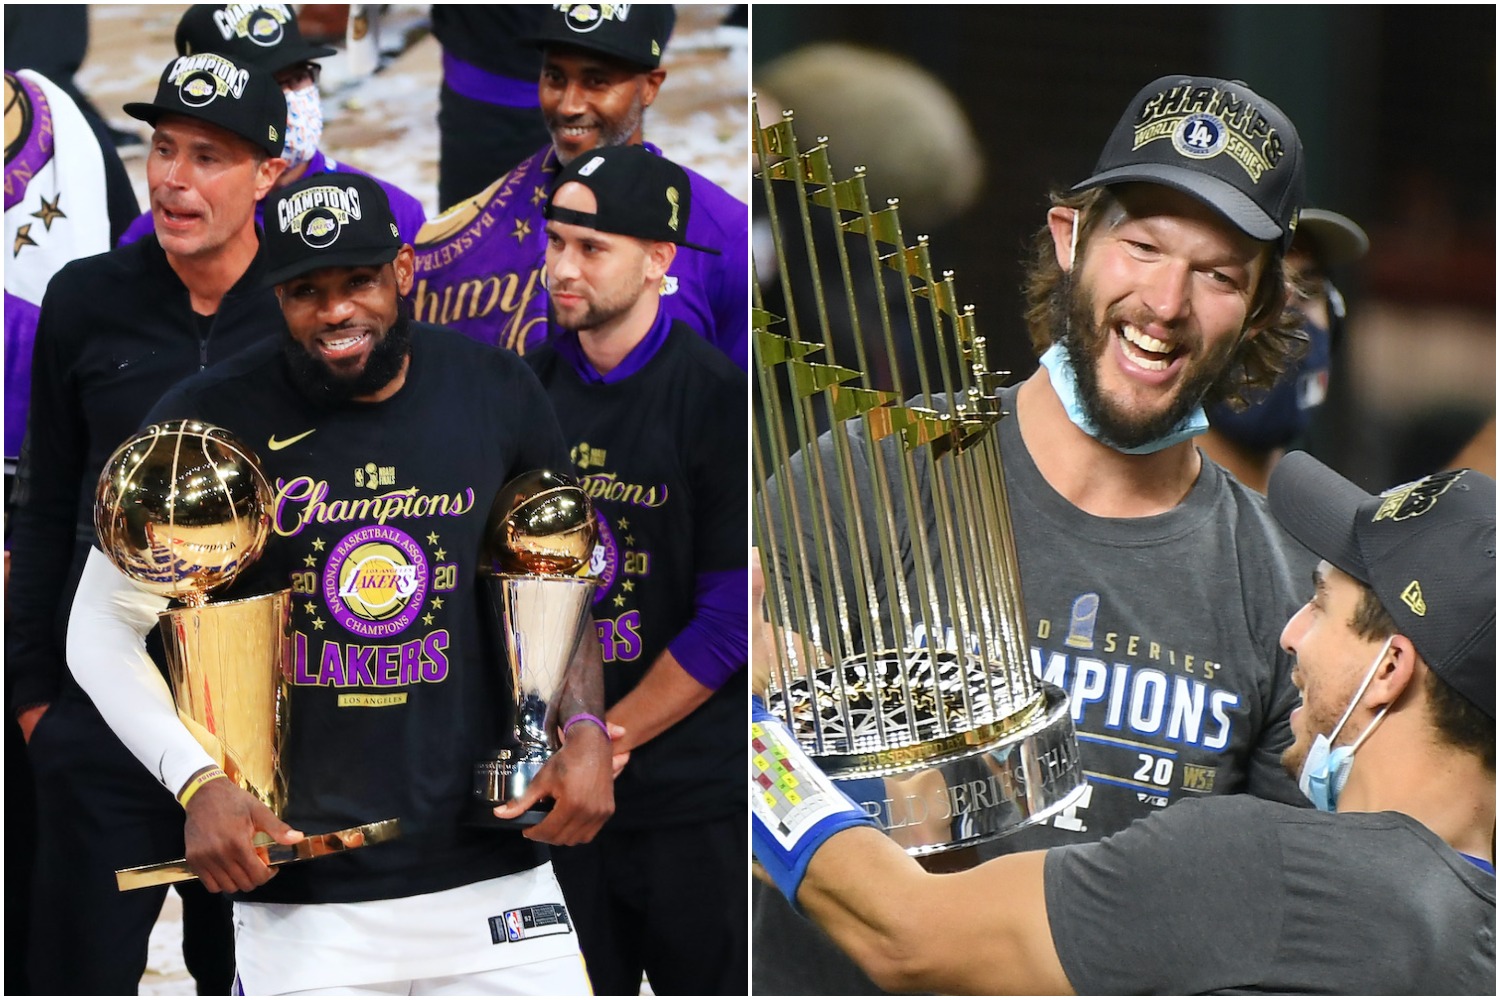 LeBron James and the Lakers and Clayton Kershaw and the Dodgers brought championship trophies to LA in 2020 -- and it wasn't the first time those teams won titles in the same year.